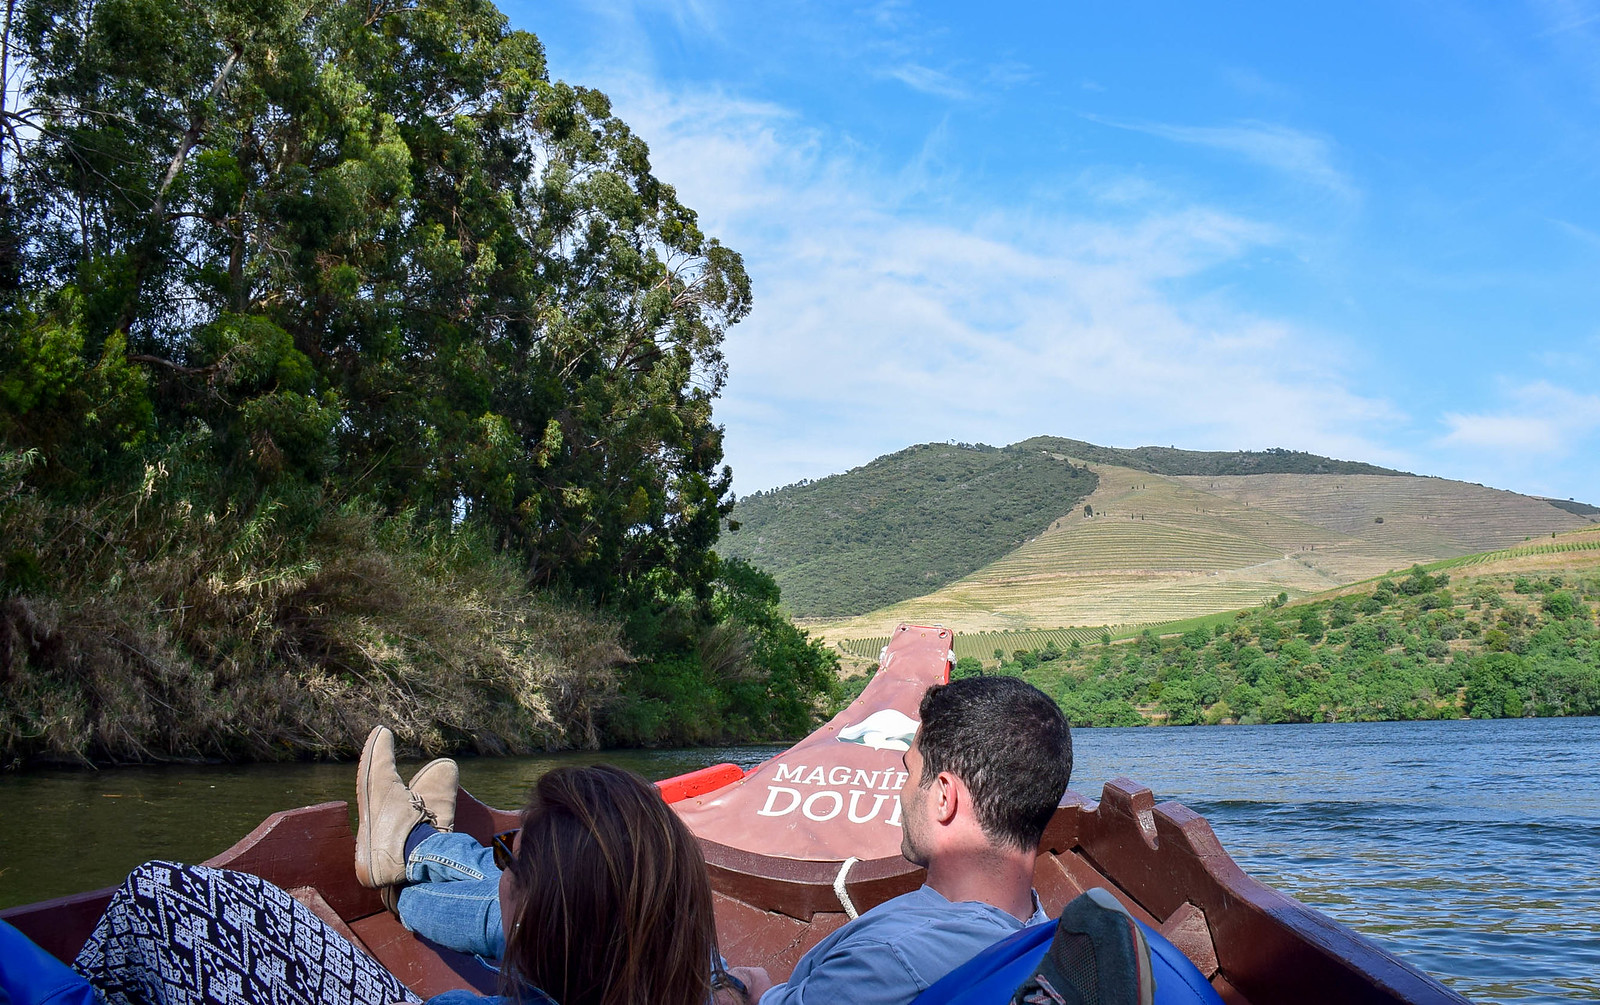 Best tour of the Douro Valley